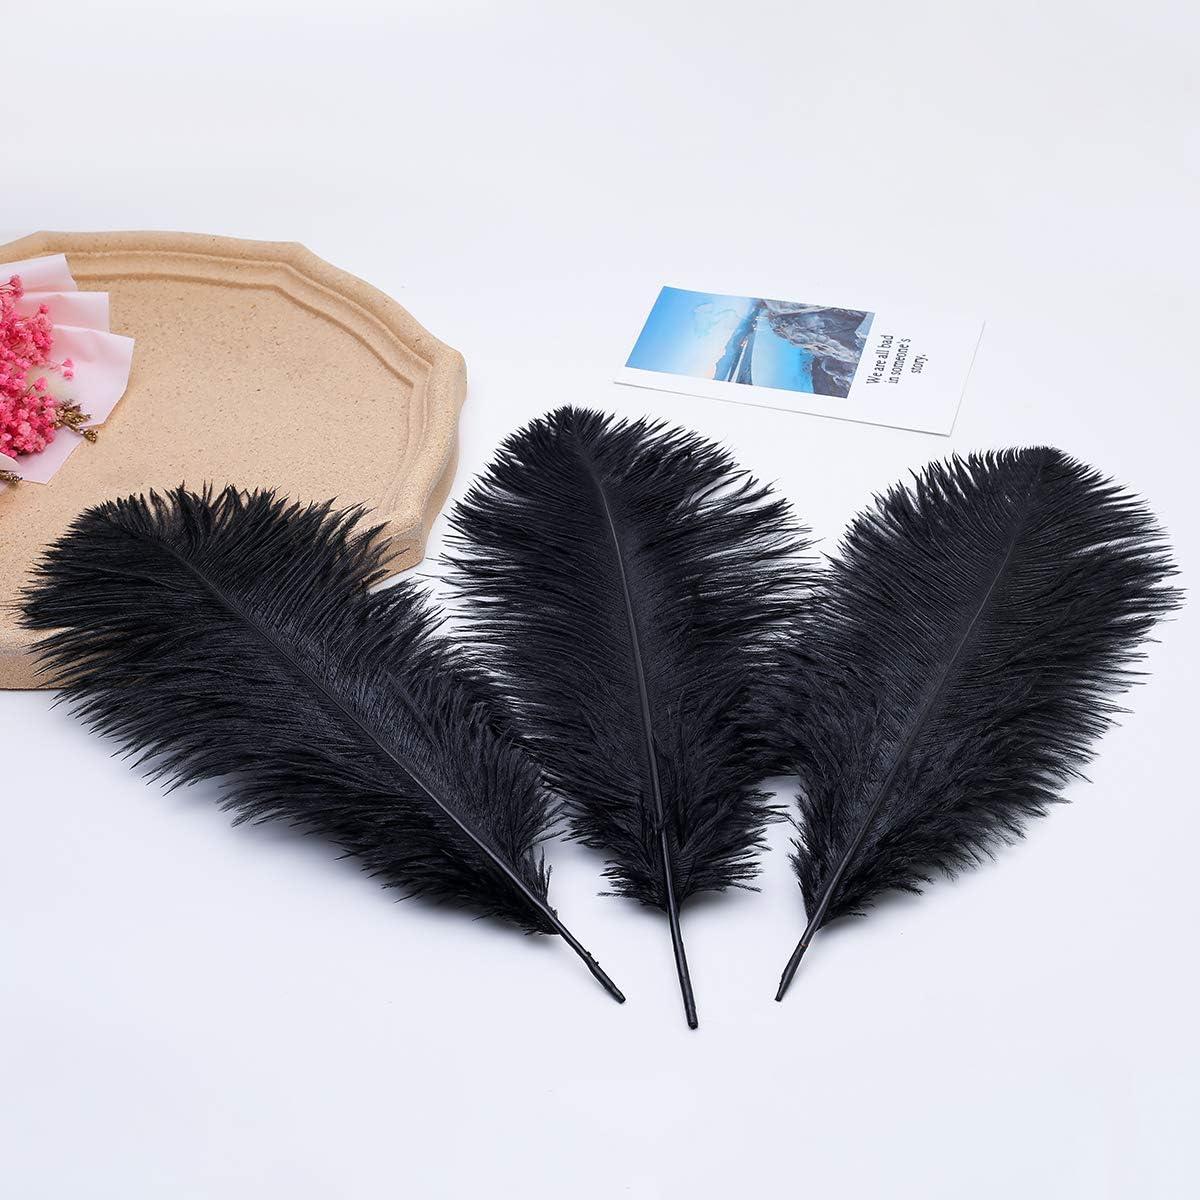 THARAHT Black Ostrich Feathers 24pcs Natural Bulk 10-12Inch 25cm-30cm for  Crafts Wedding Party Centerpieces Halloween and Home Decoration Feathers 